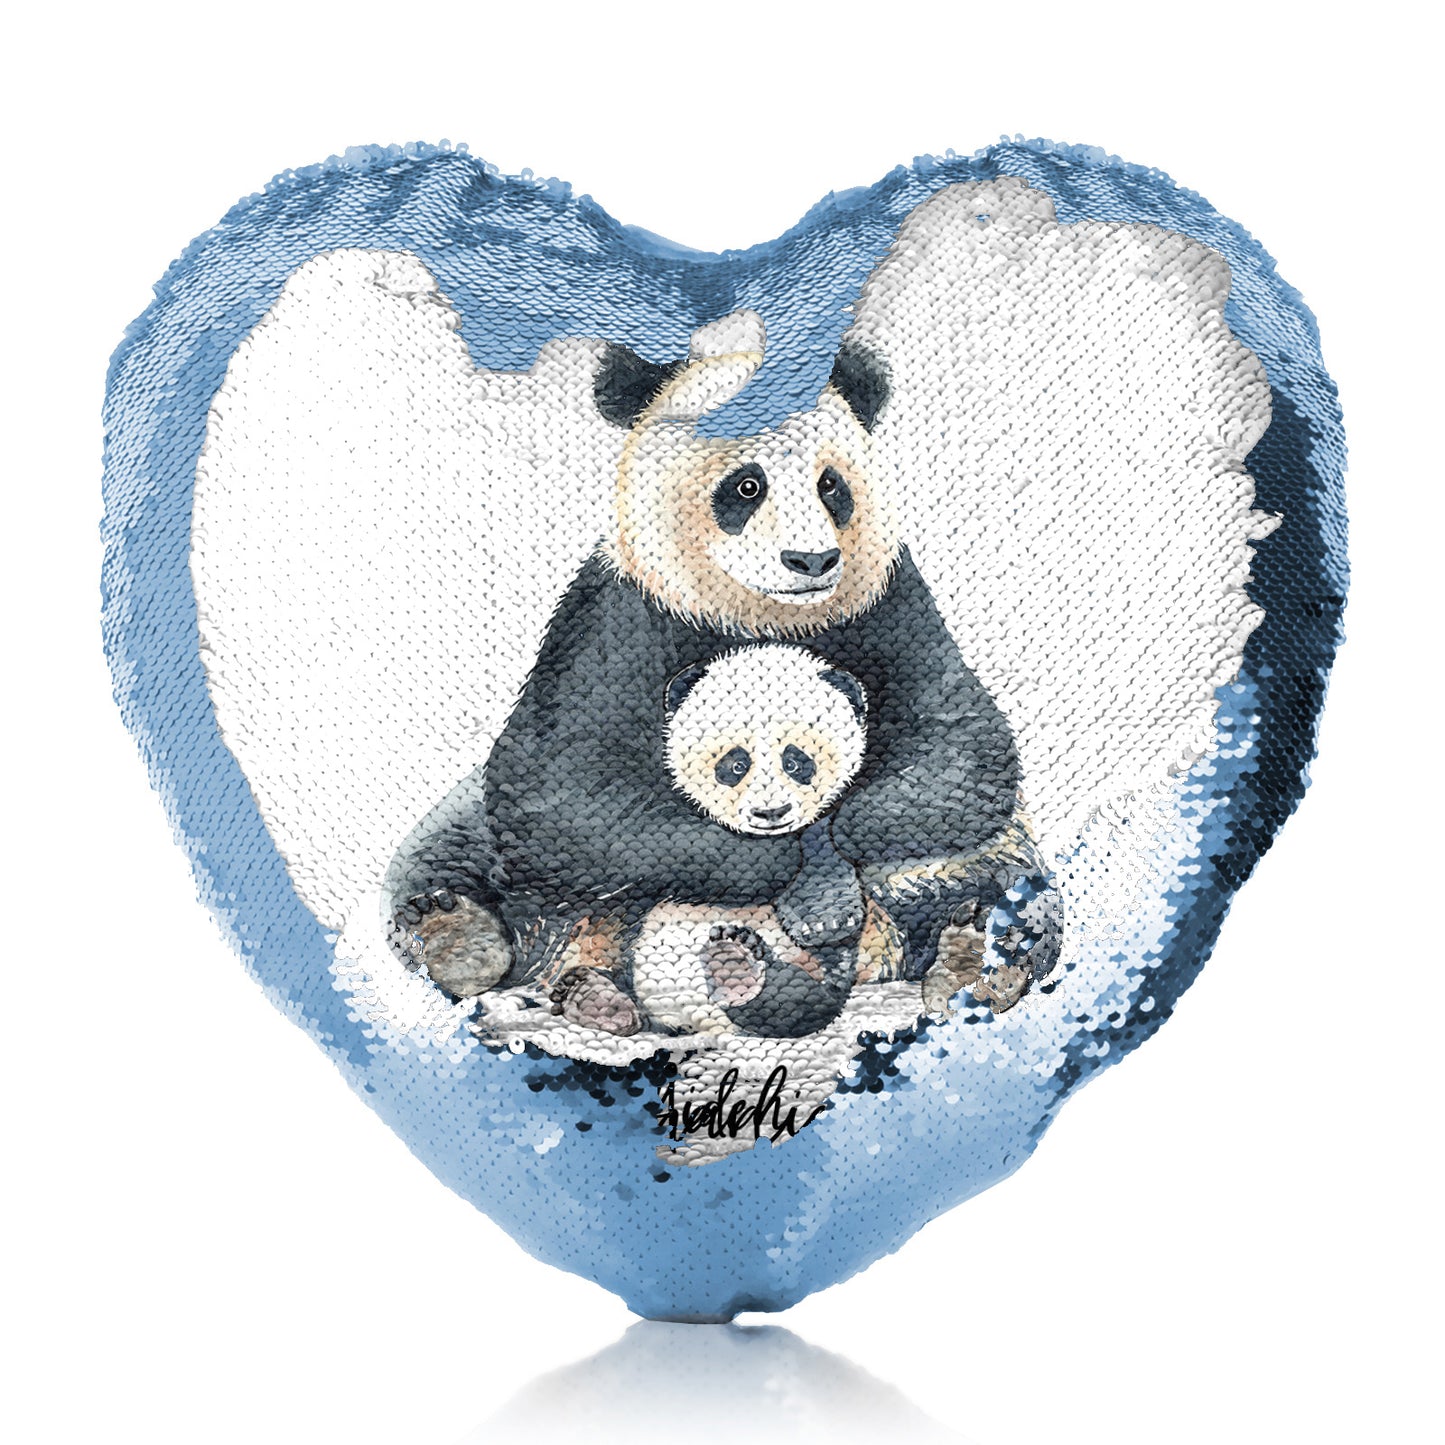 Personalised Sequin Heart Cushion with Welcoming Text and Relaxing Mum and Baby Pandas